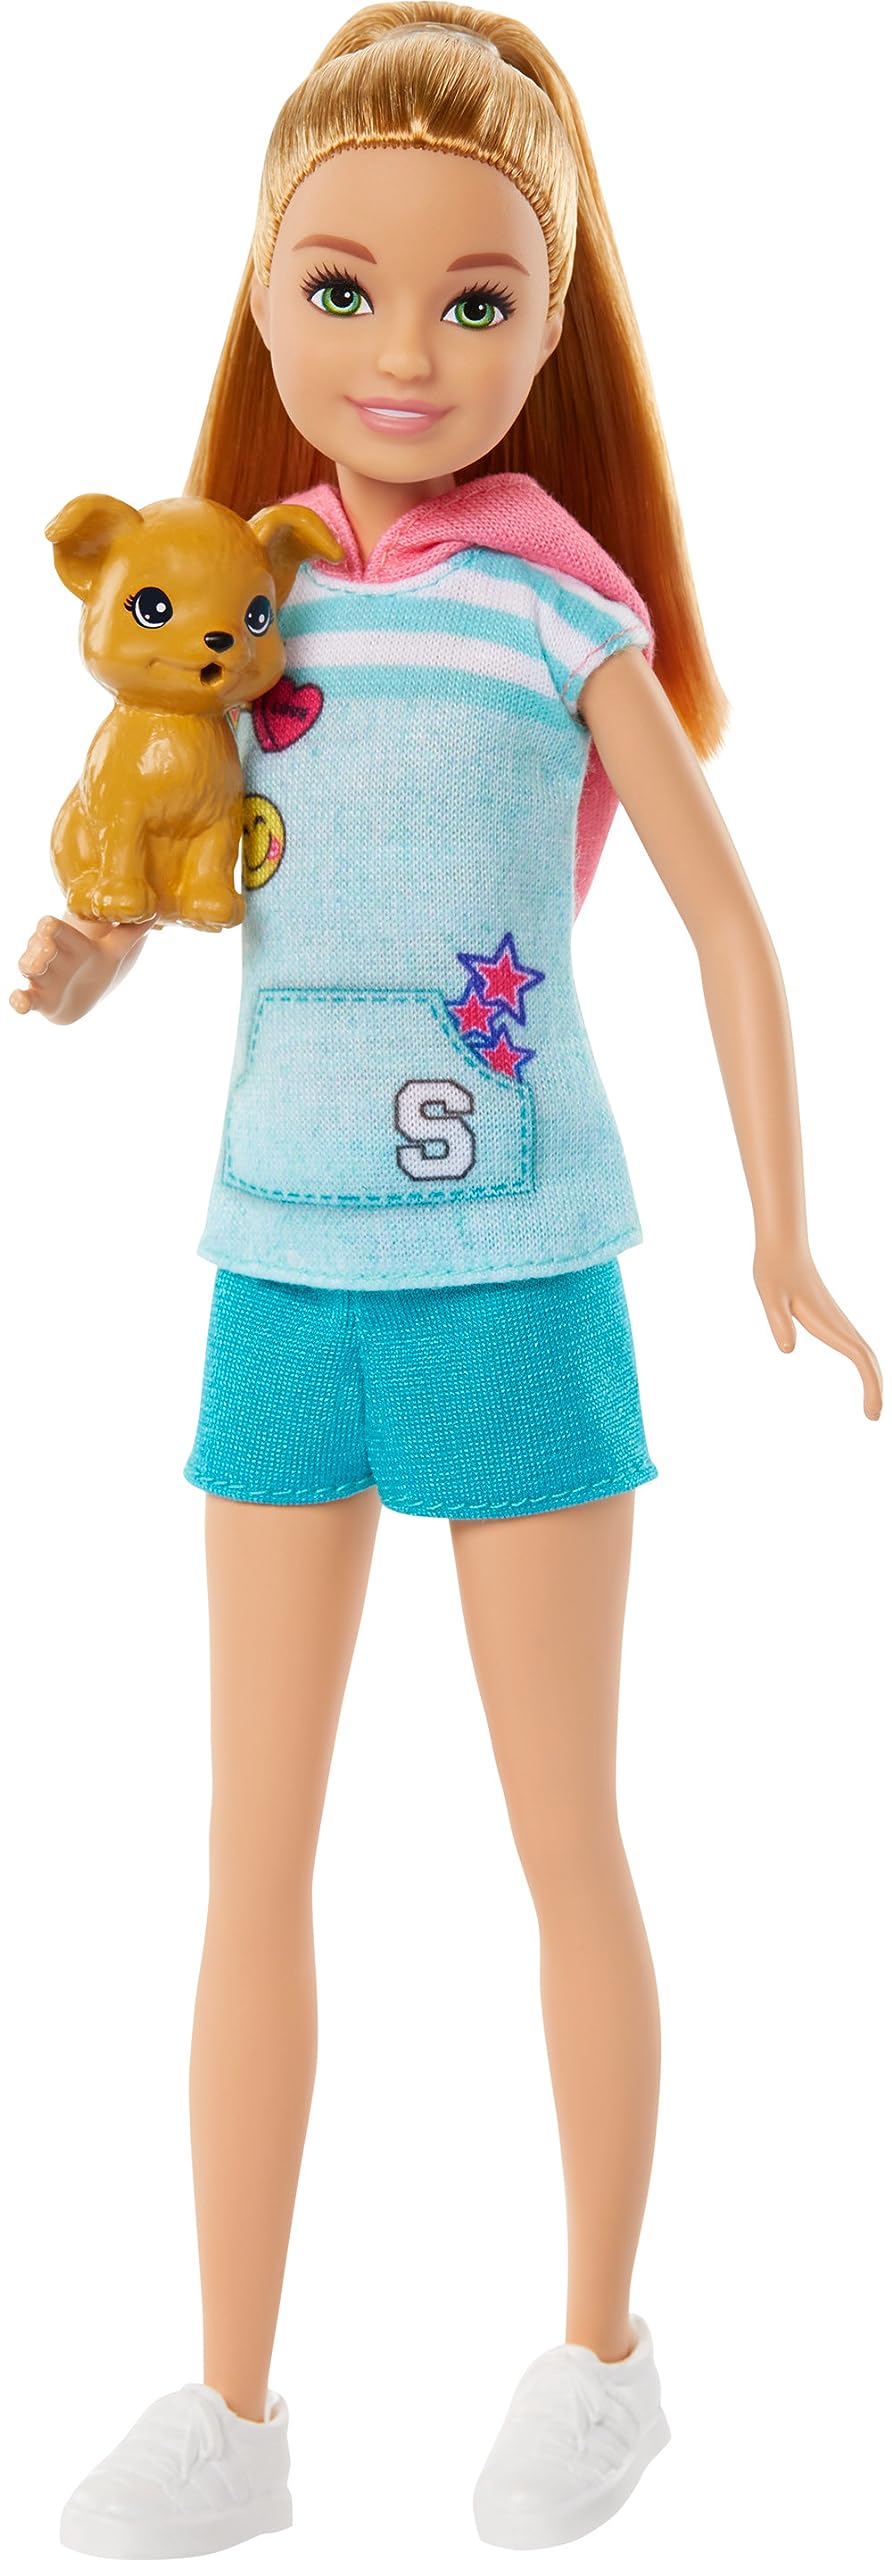 Barbie Stacie Doll with Pet Dog, from and Stacie to The Rescue Movie Toys, Blonde Hair Doll